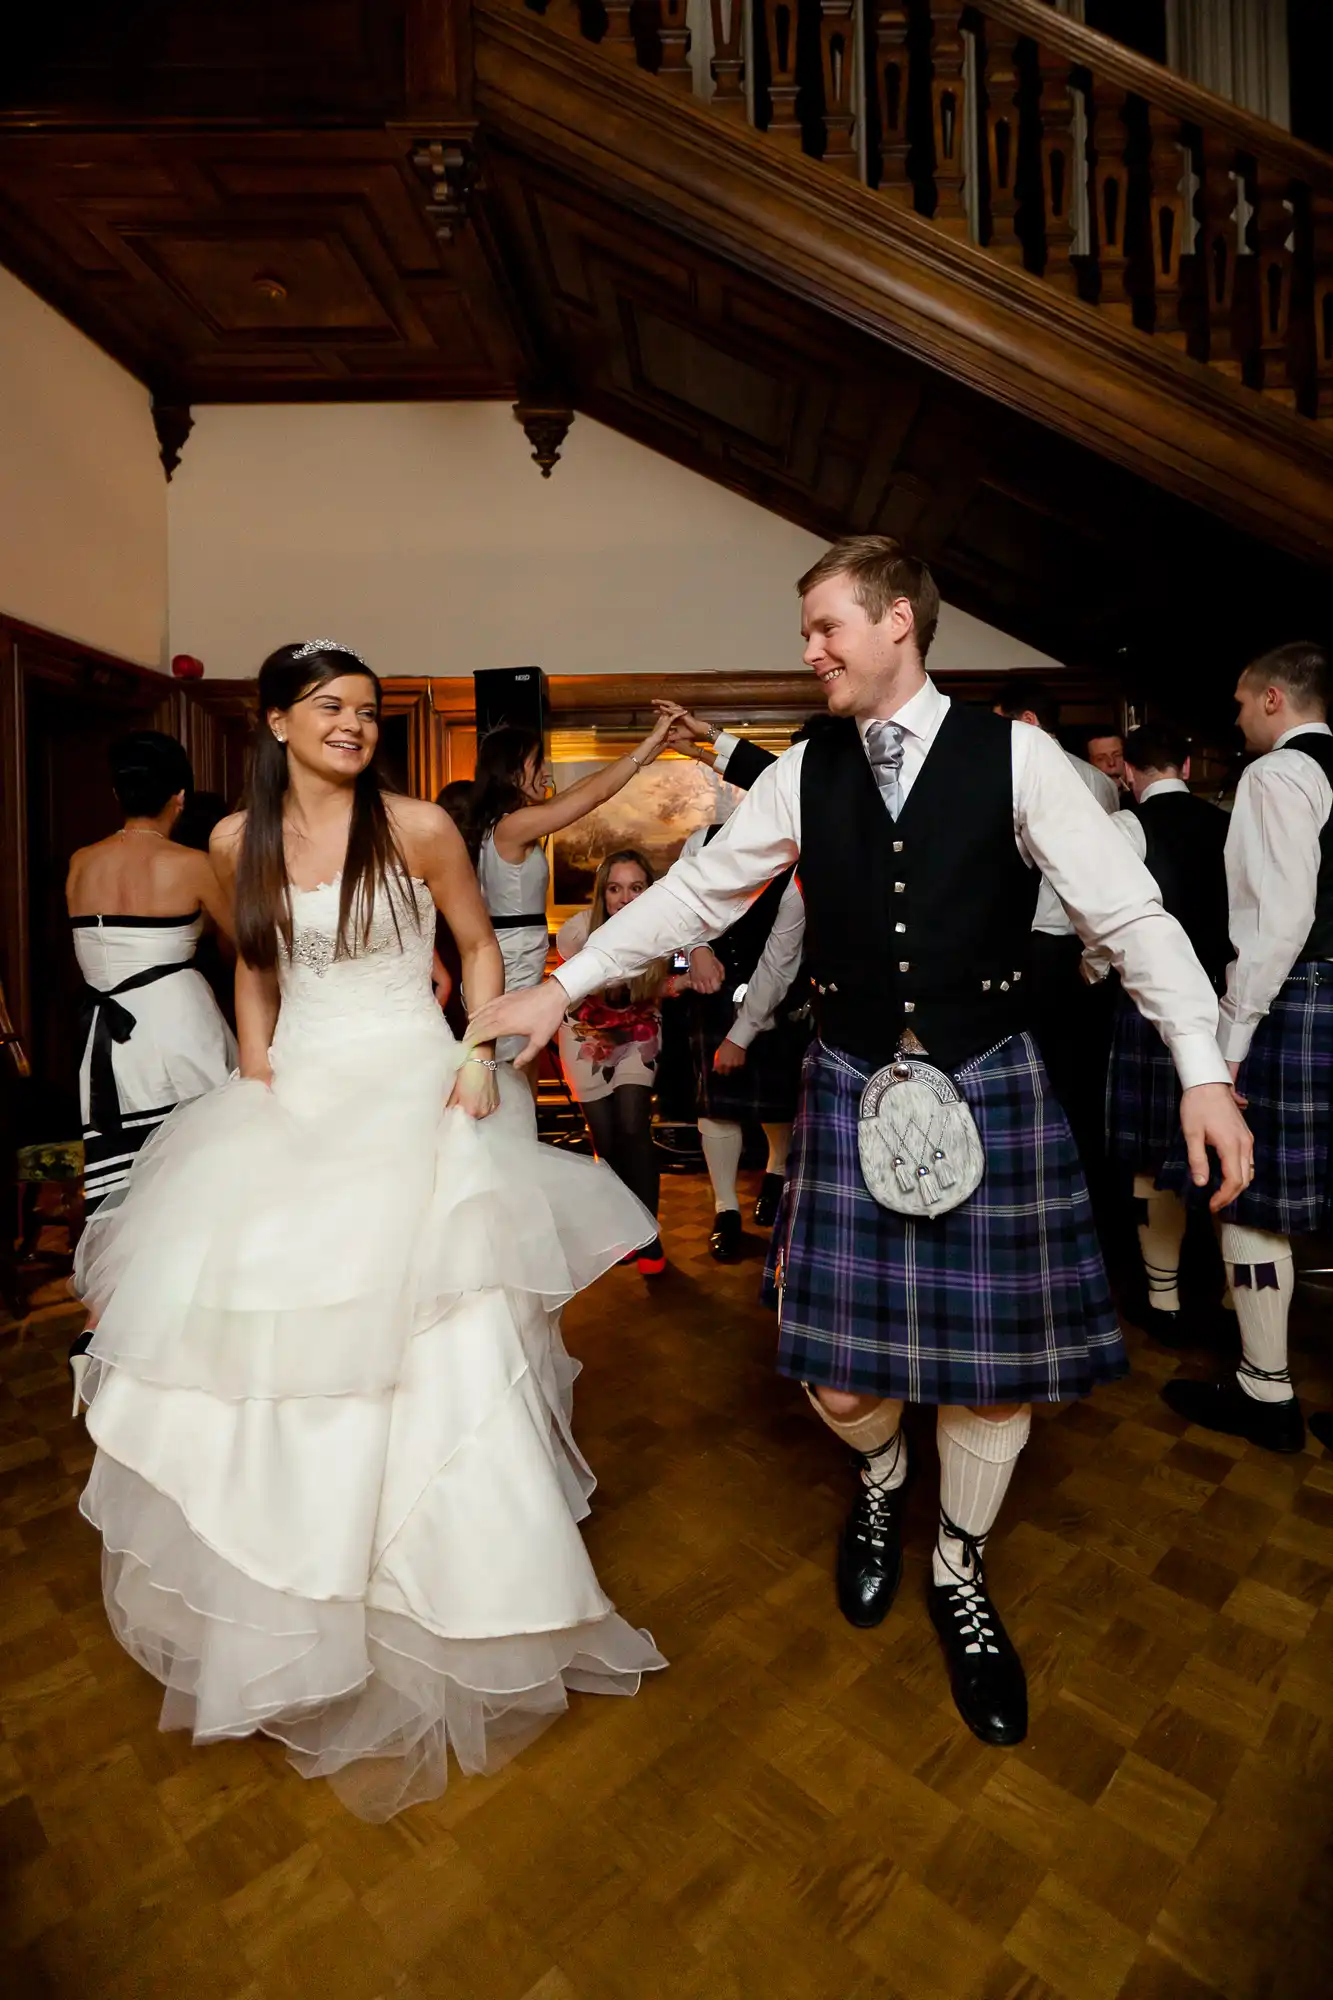 A bride in a white gown and a groom in a kilt and sporran holding hands and smiling during a dance at a wedding reception with guests in the background.